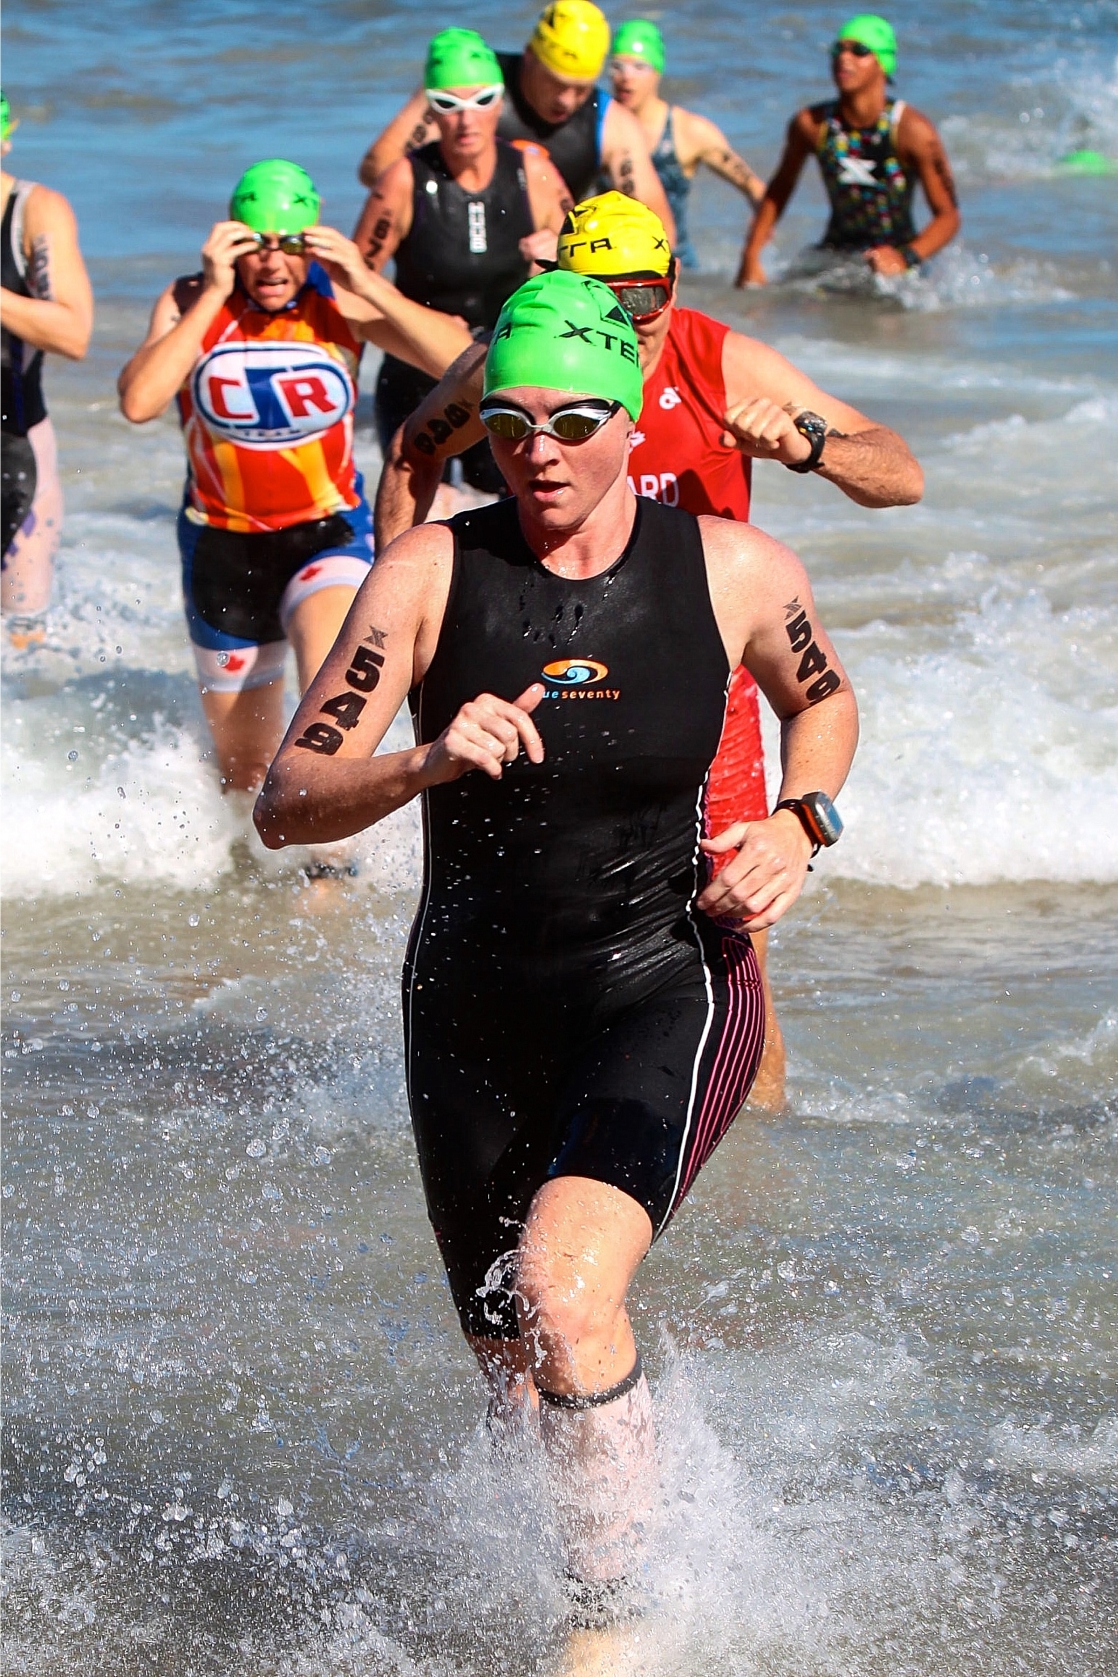 Cindy exiting the water at the Xterra World Championships